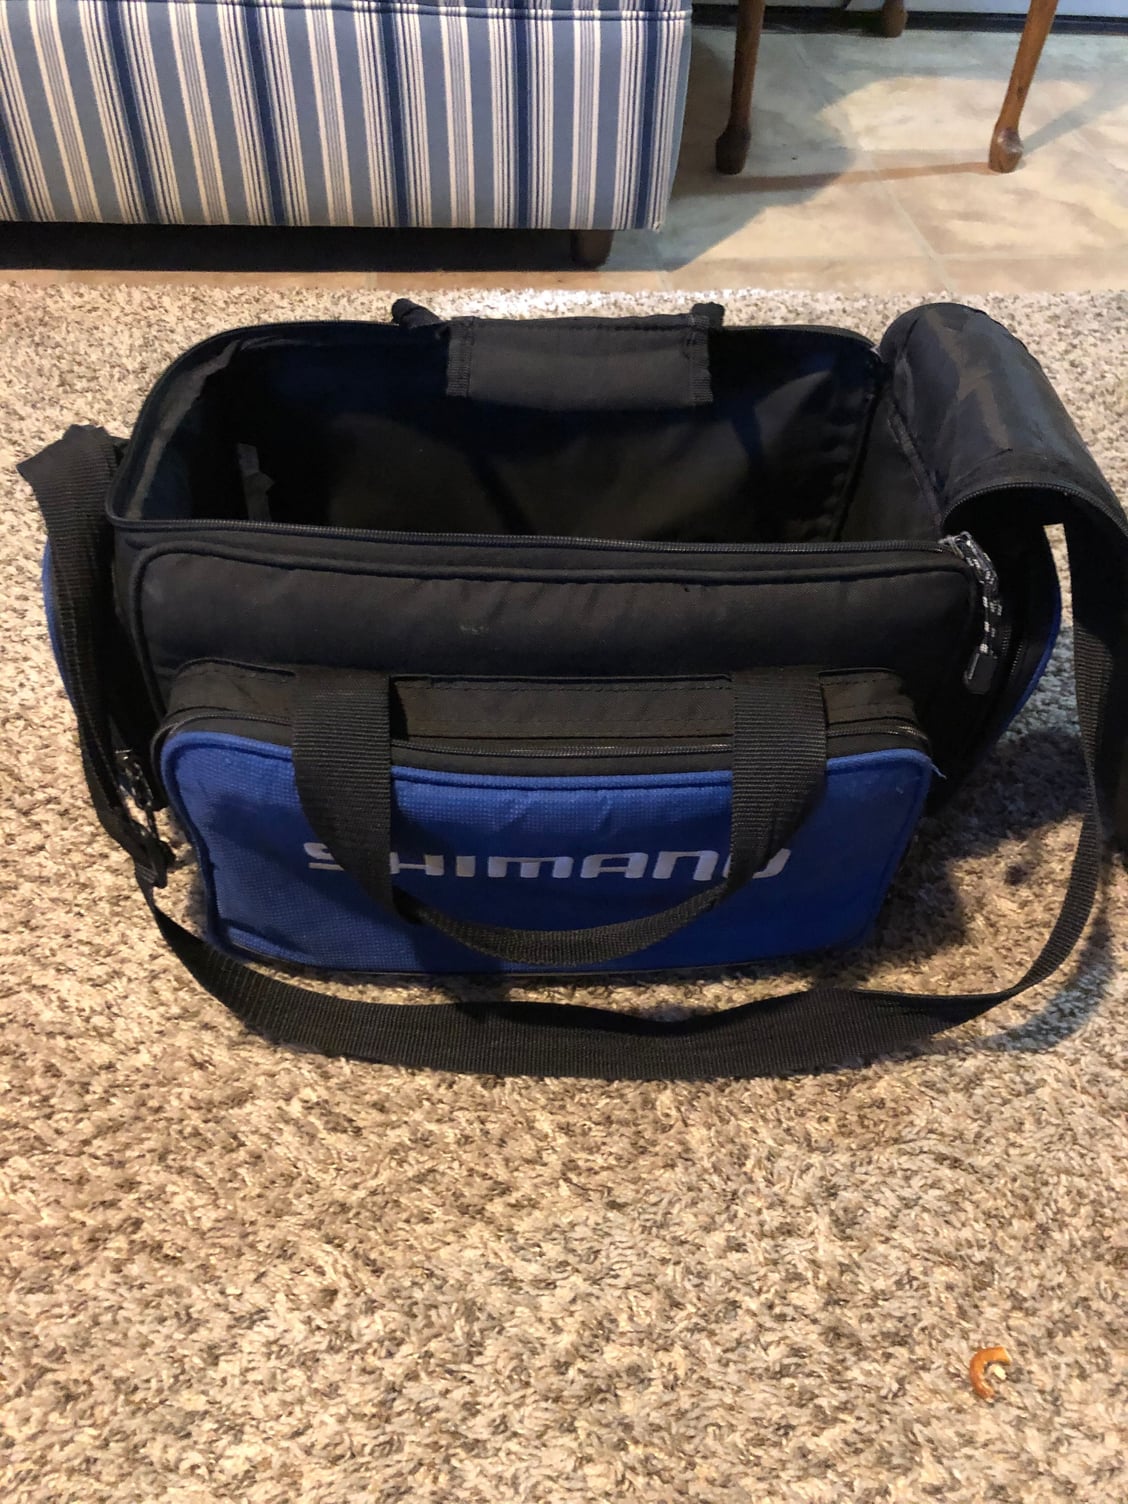 Shimano Tackle Bag - holds 4 - 3700 size boxes - SOLD - The Hull Truth -  Boating and Fishing Forum